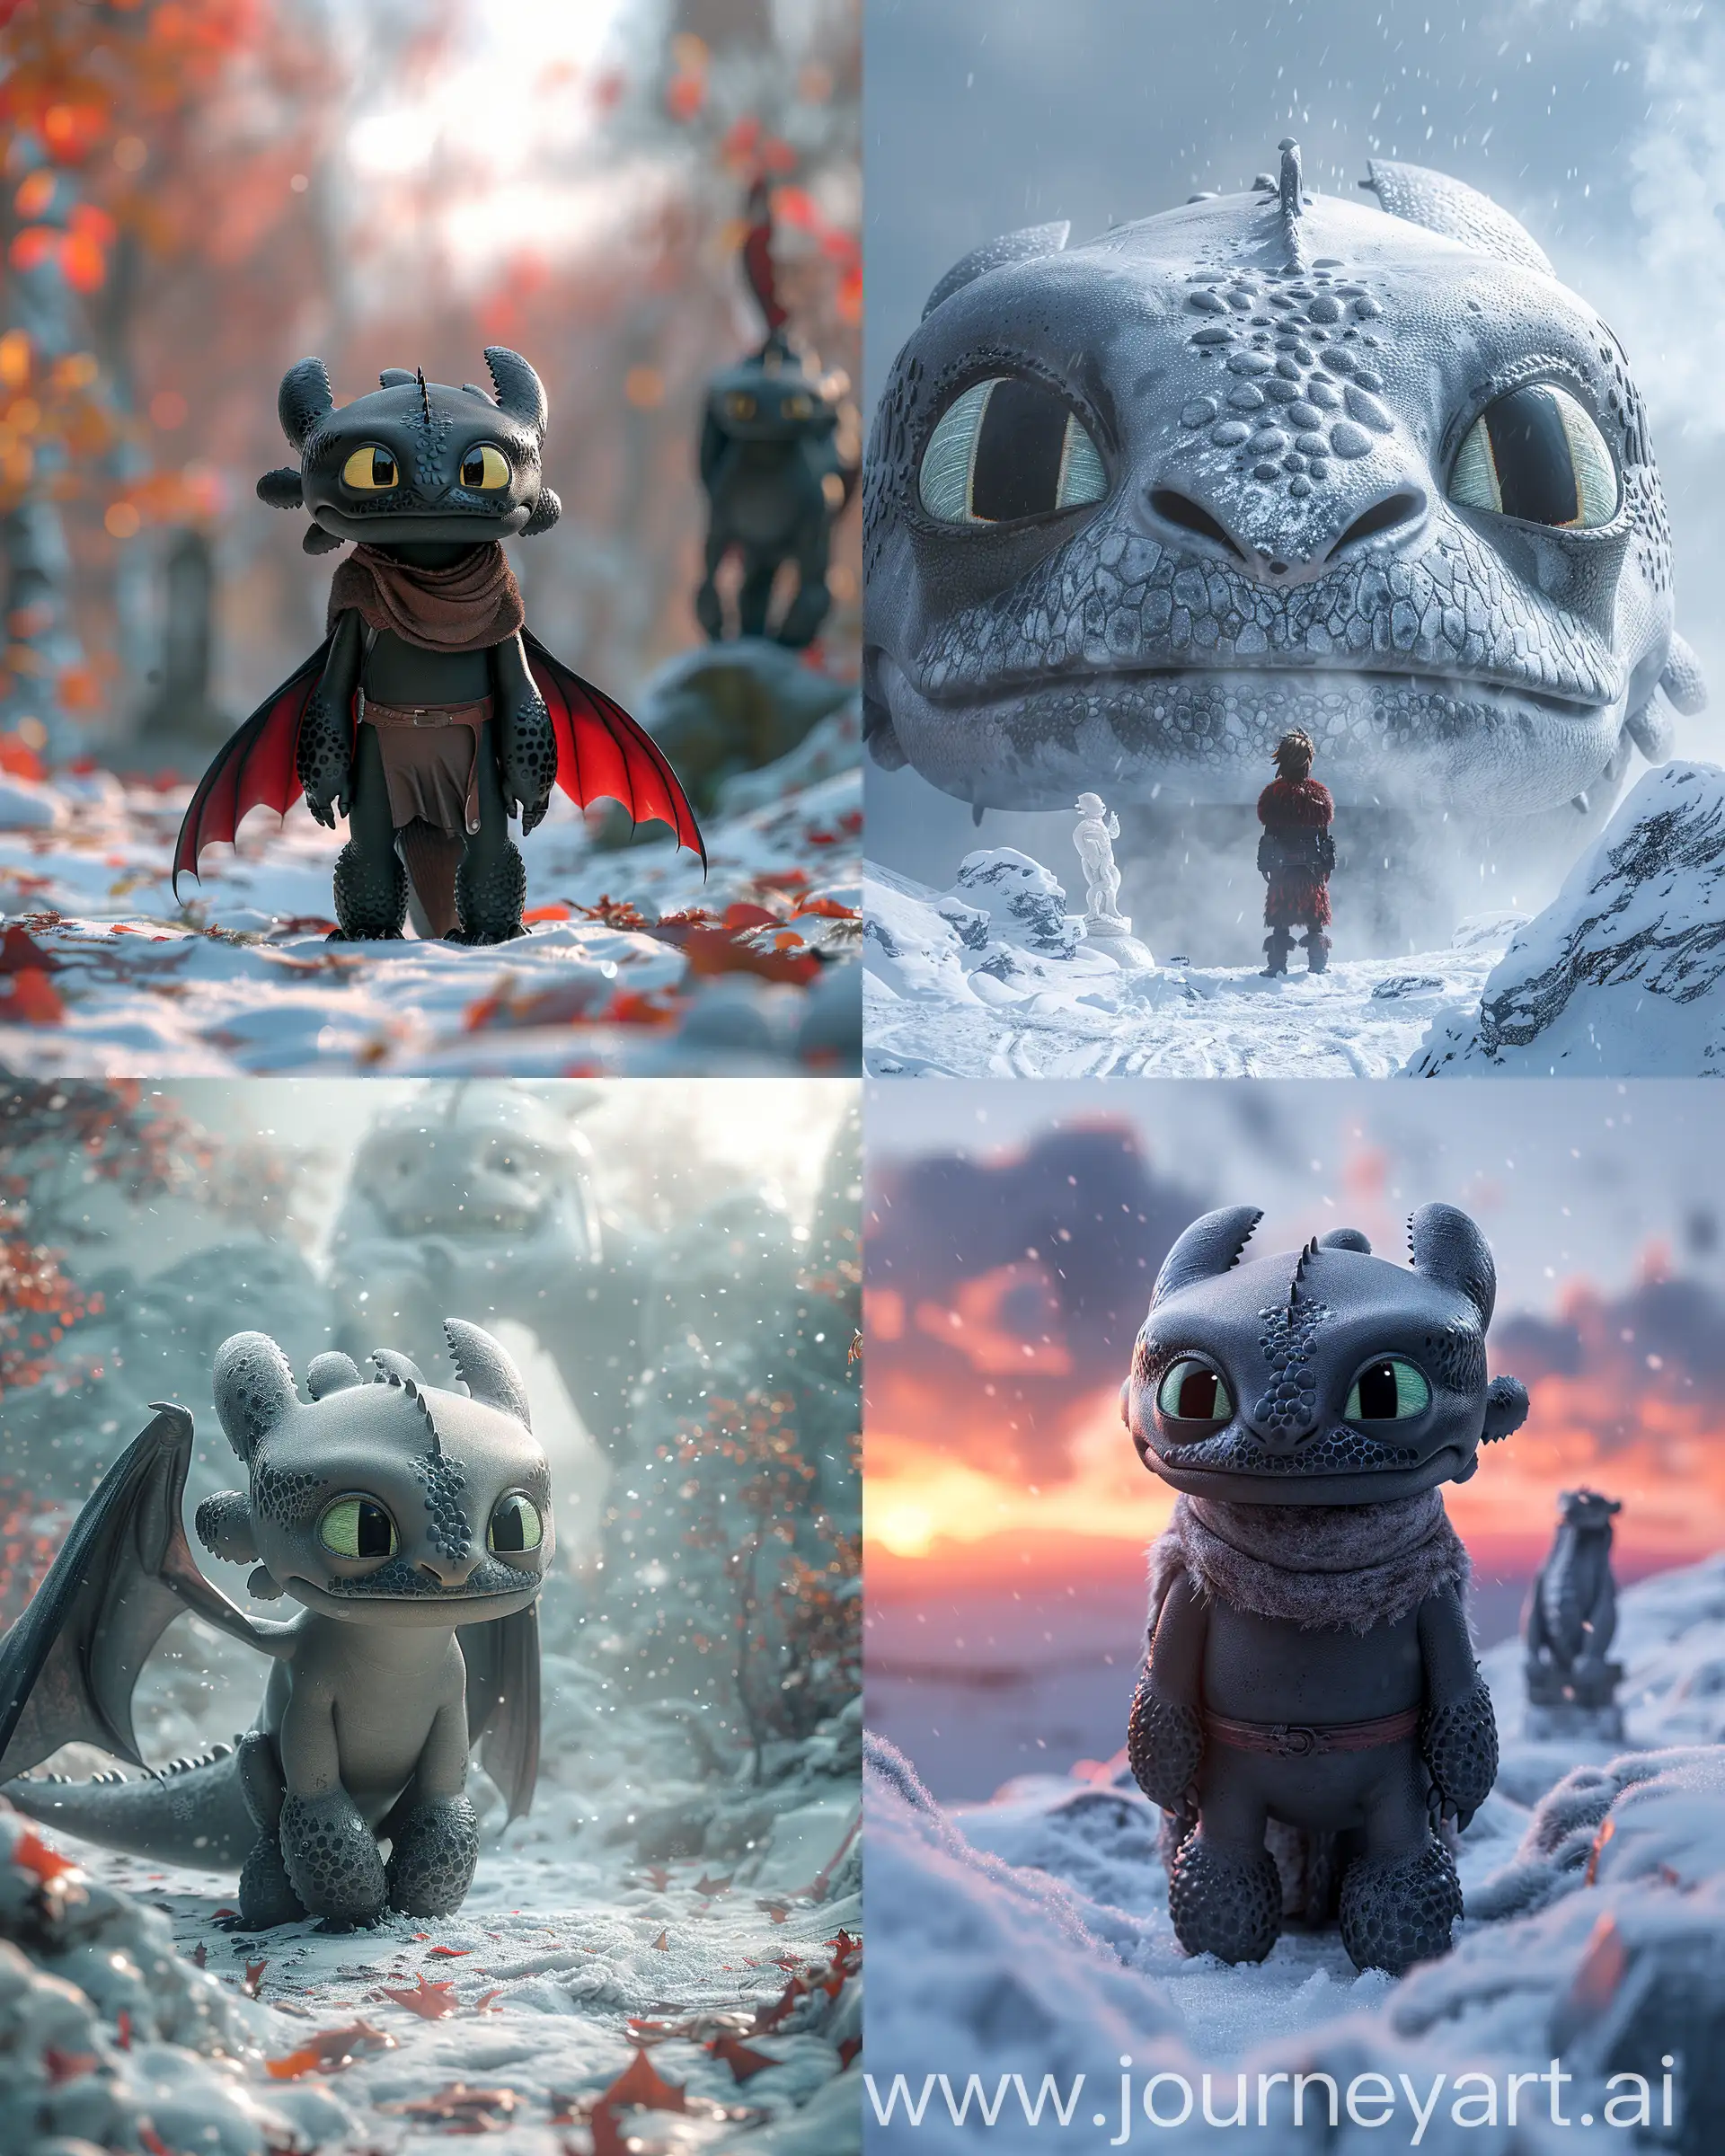 Toothless-from-How-to-Train-Your-Dragon-Contemplating-Statue-in-Snow